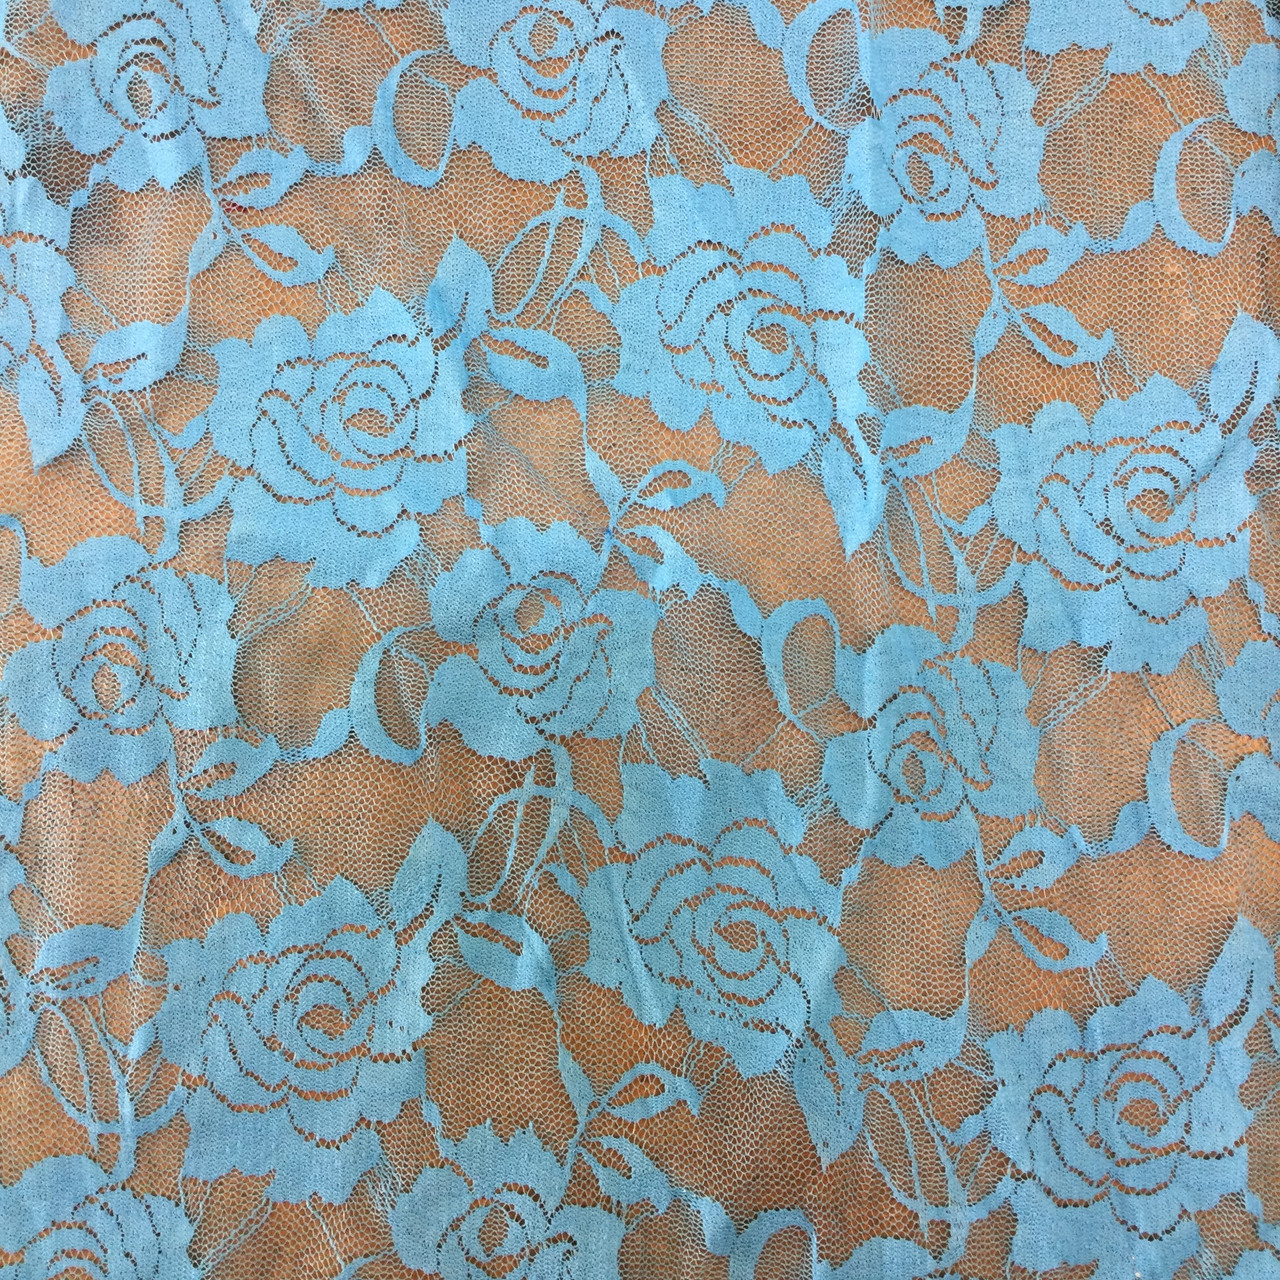 Rose Lace Fabric 